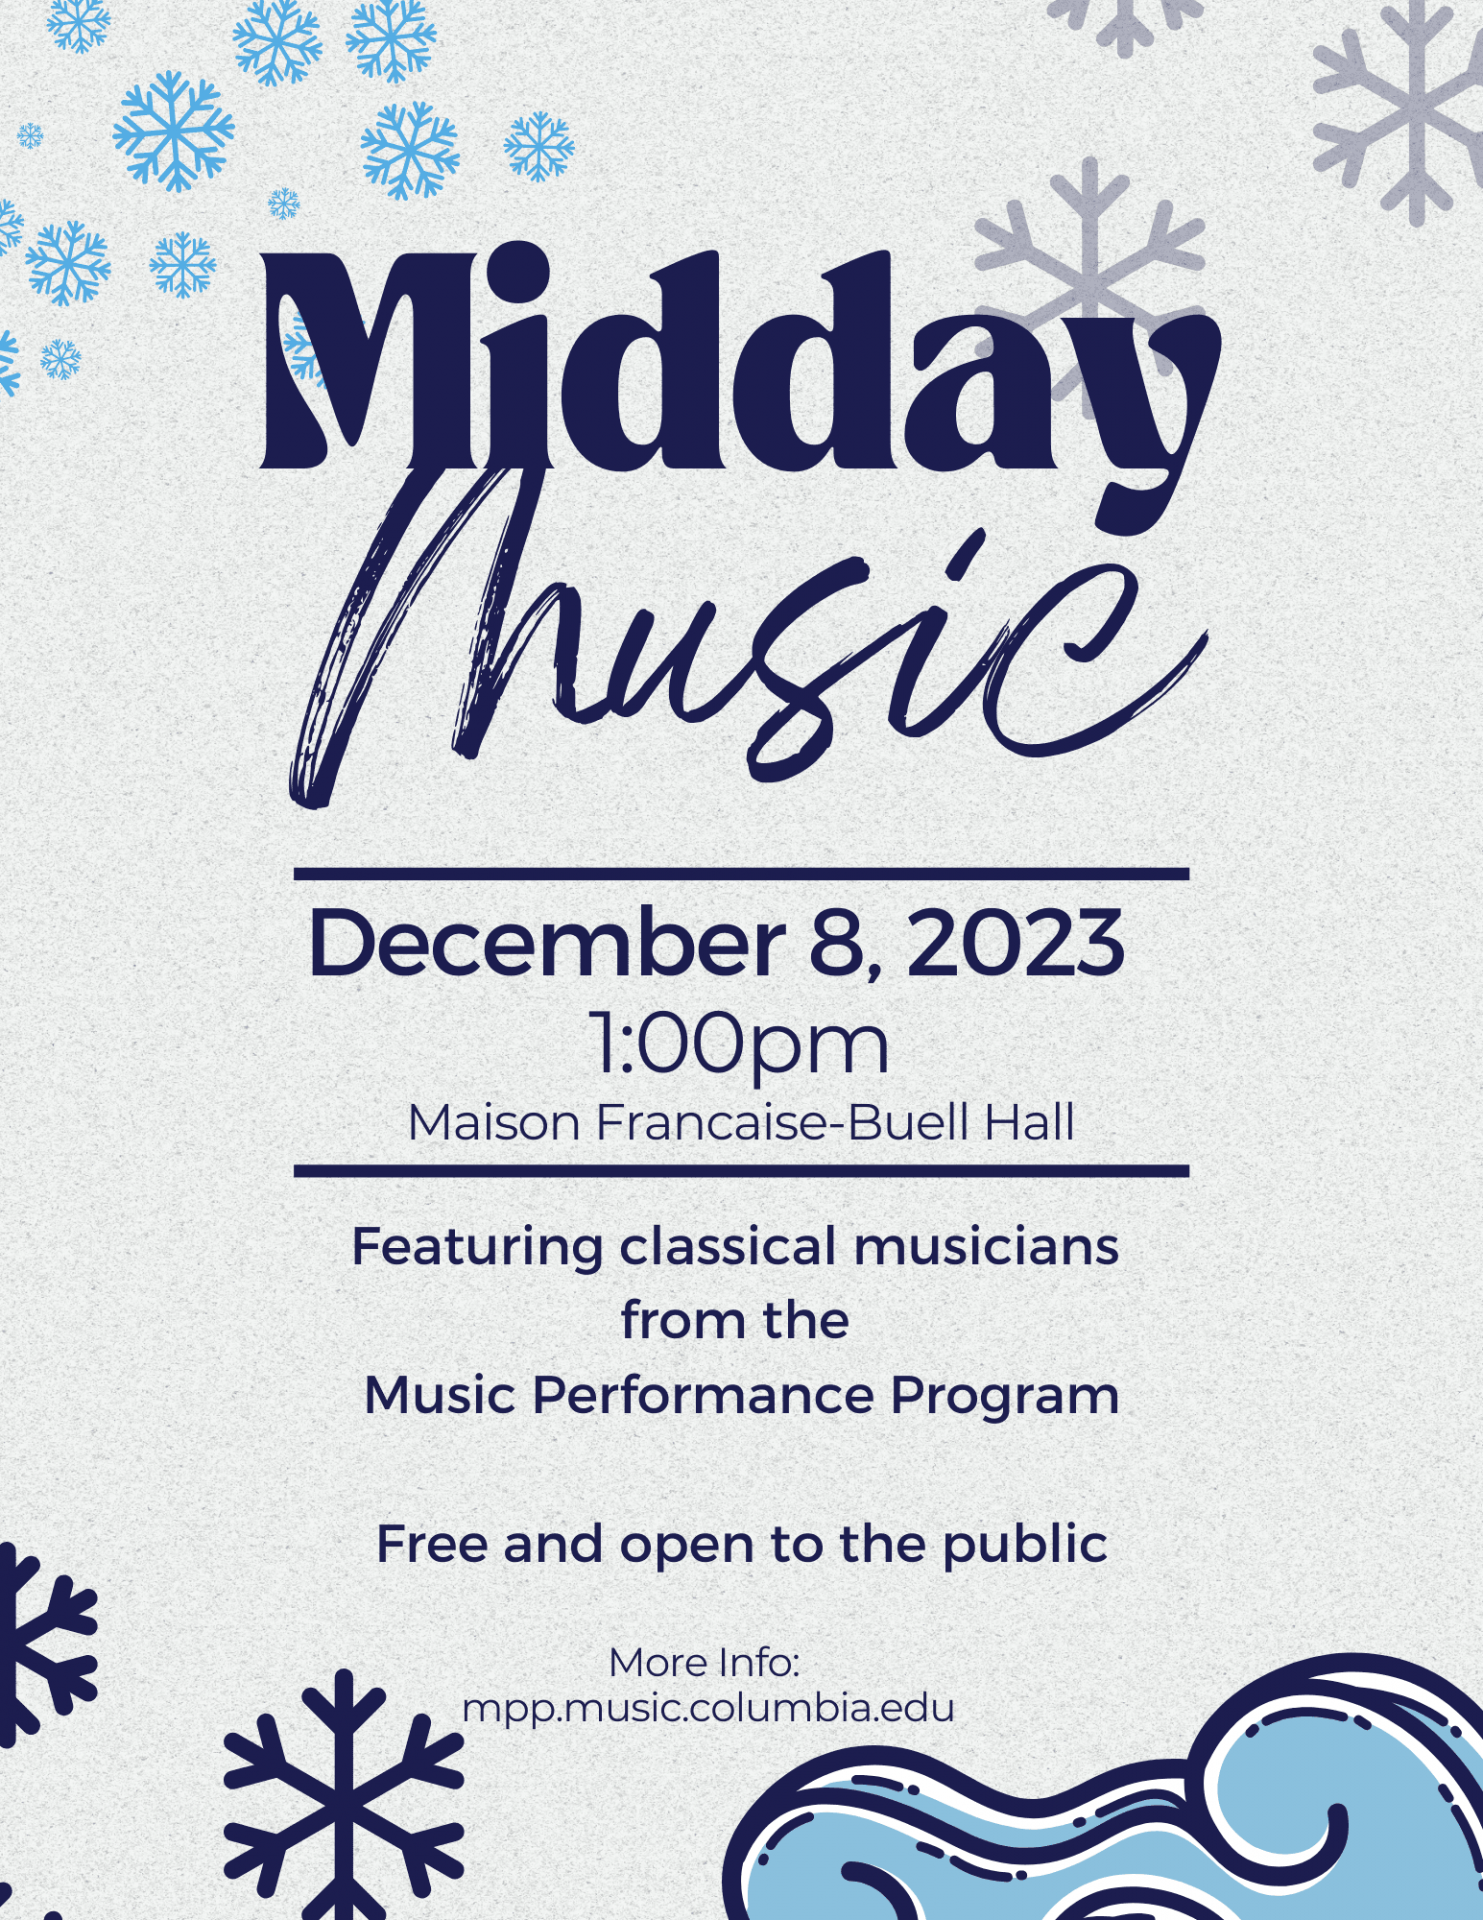 Flyer for Mid Day Music on 12/8/23 at 1pm in the Maison Française, Buell Hall. Caption says featuring classical musicians from the Music Performance Program, and free and open to the public.